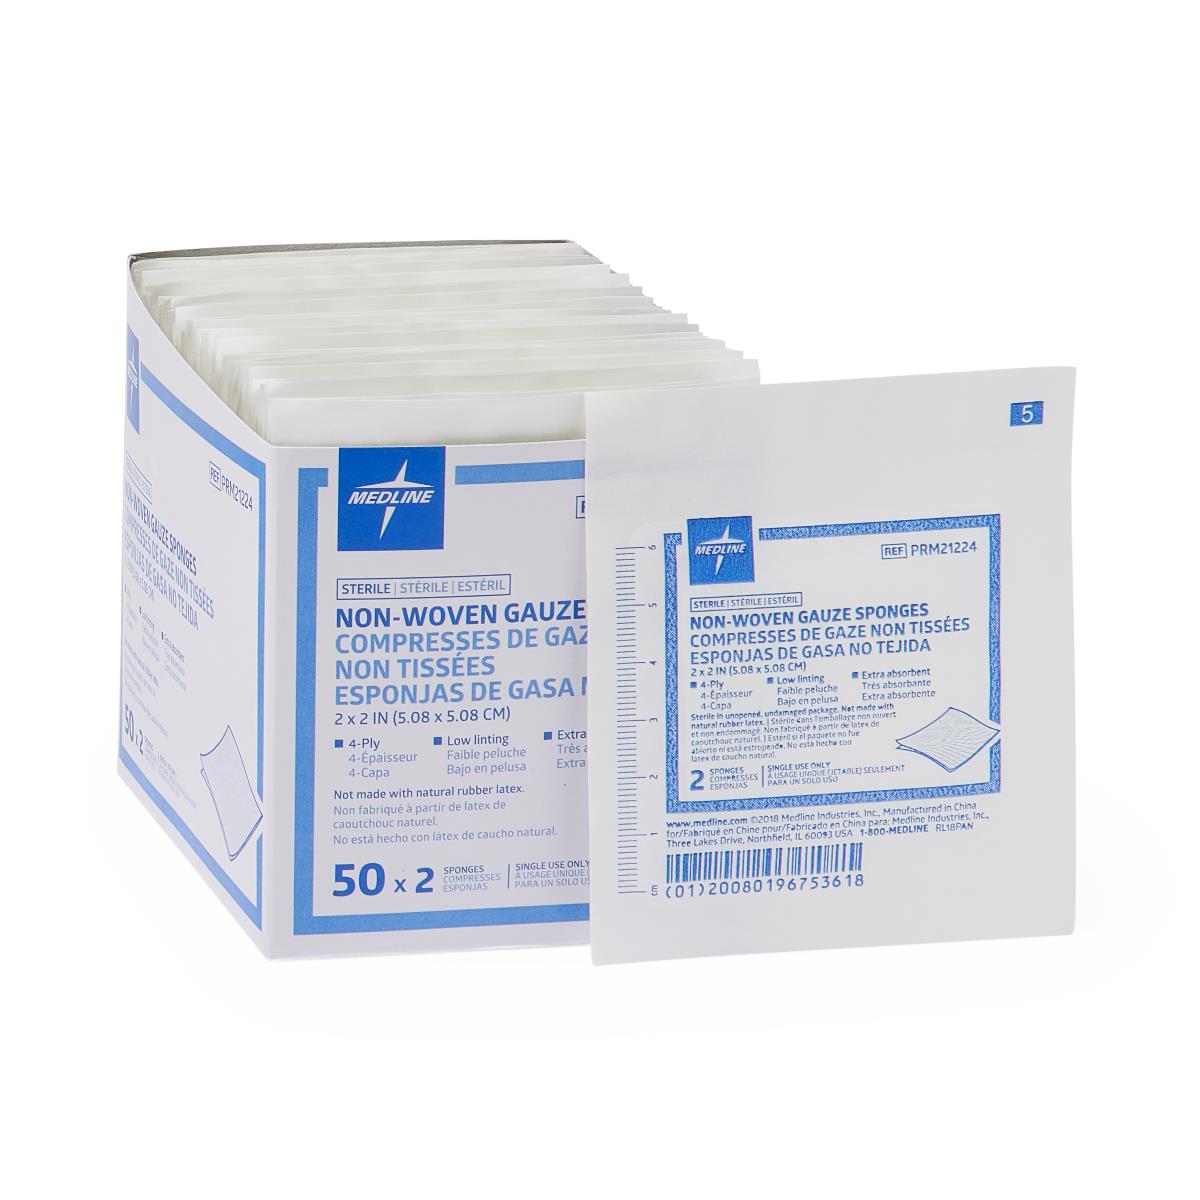 1500 Pack-Case / Non-Woven / 2.00000 IN Wound Care - MEDLINE - Wasatch Medical Supply